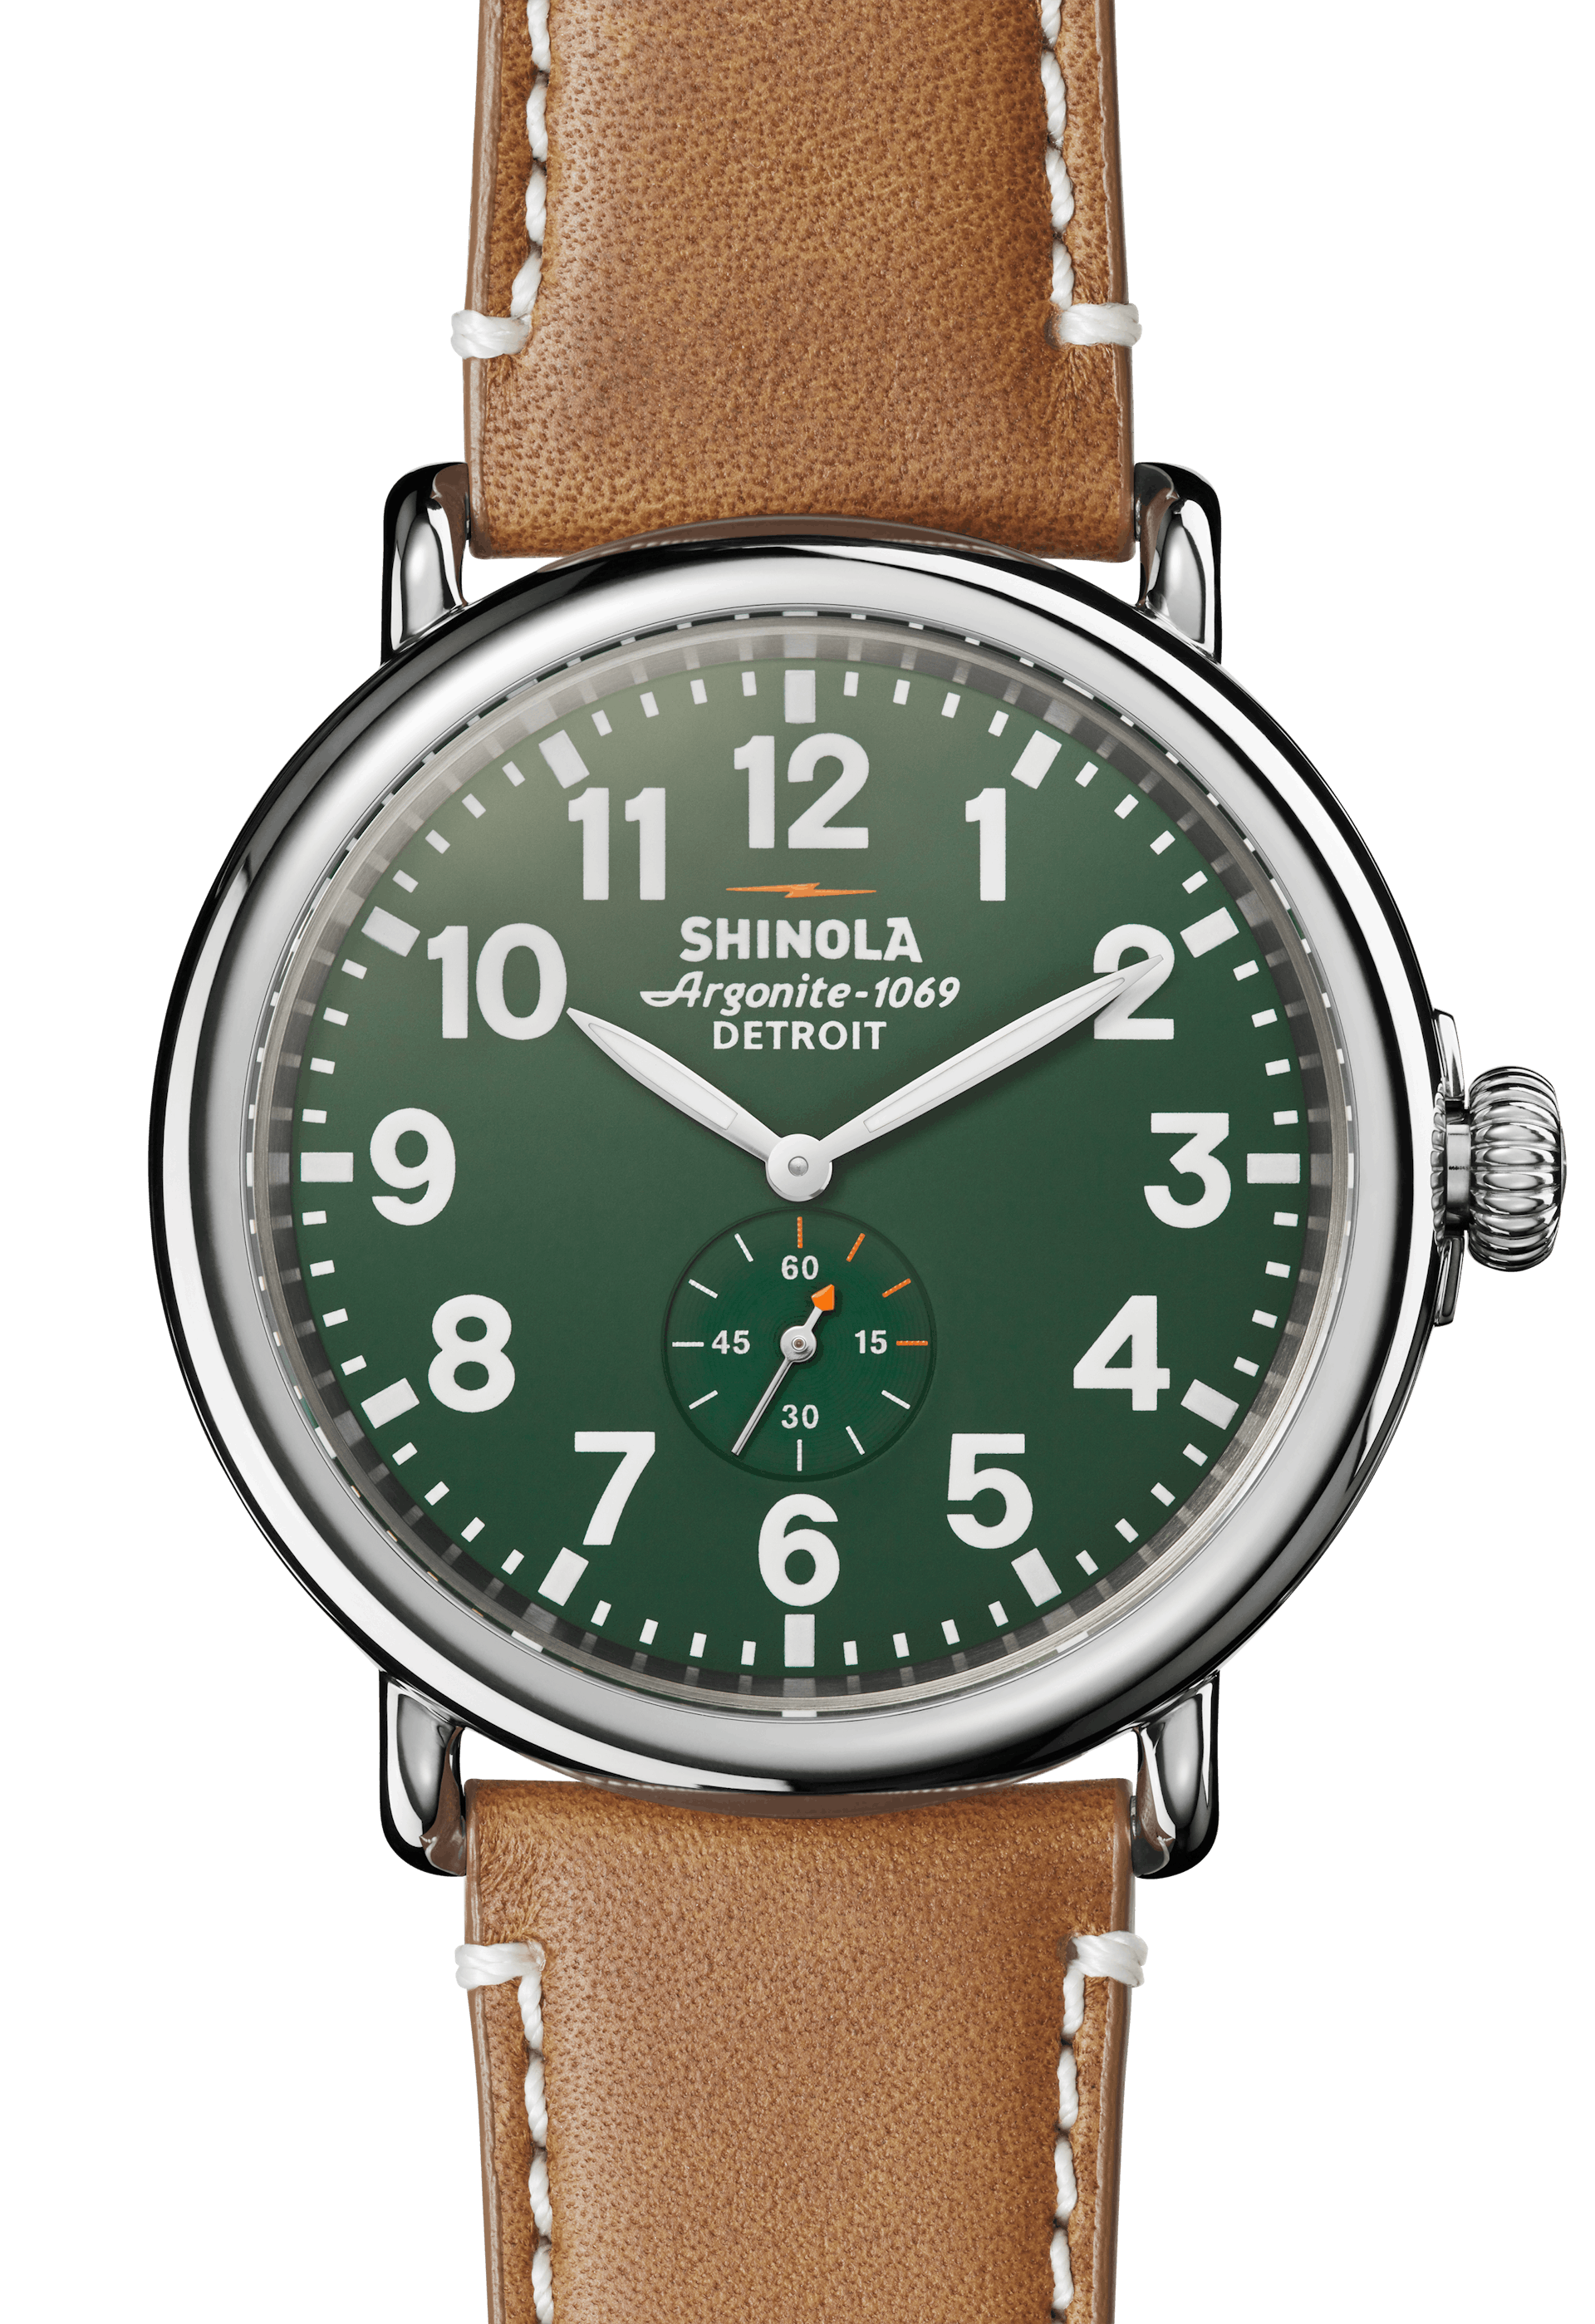 The Shinola Monster Automatic: A Dive Watch From Detroit